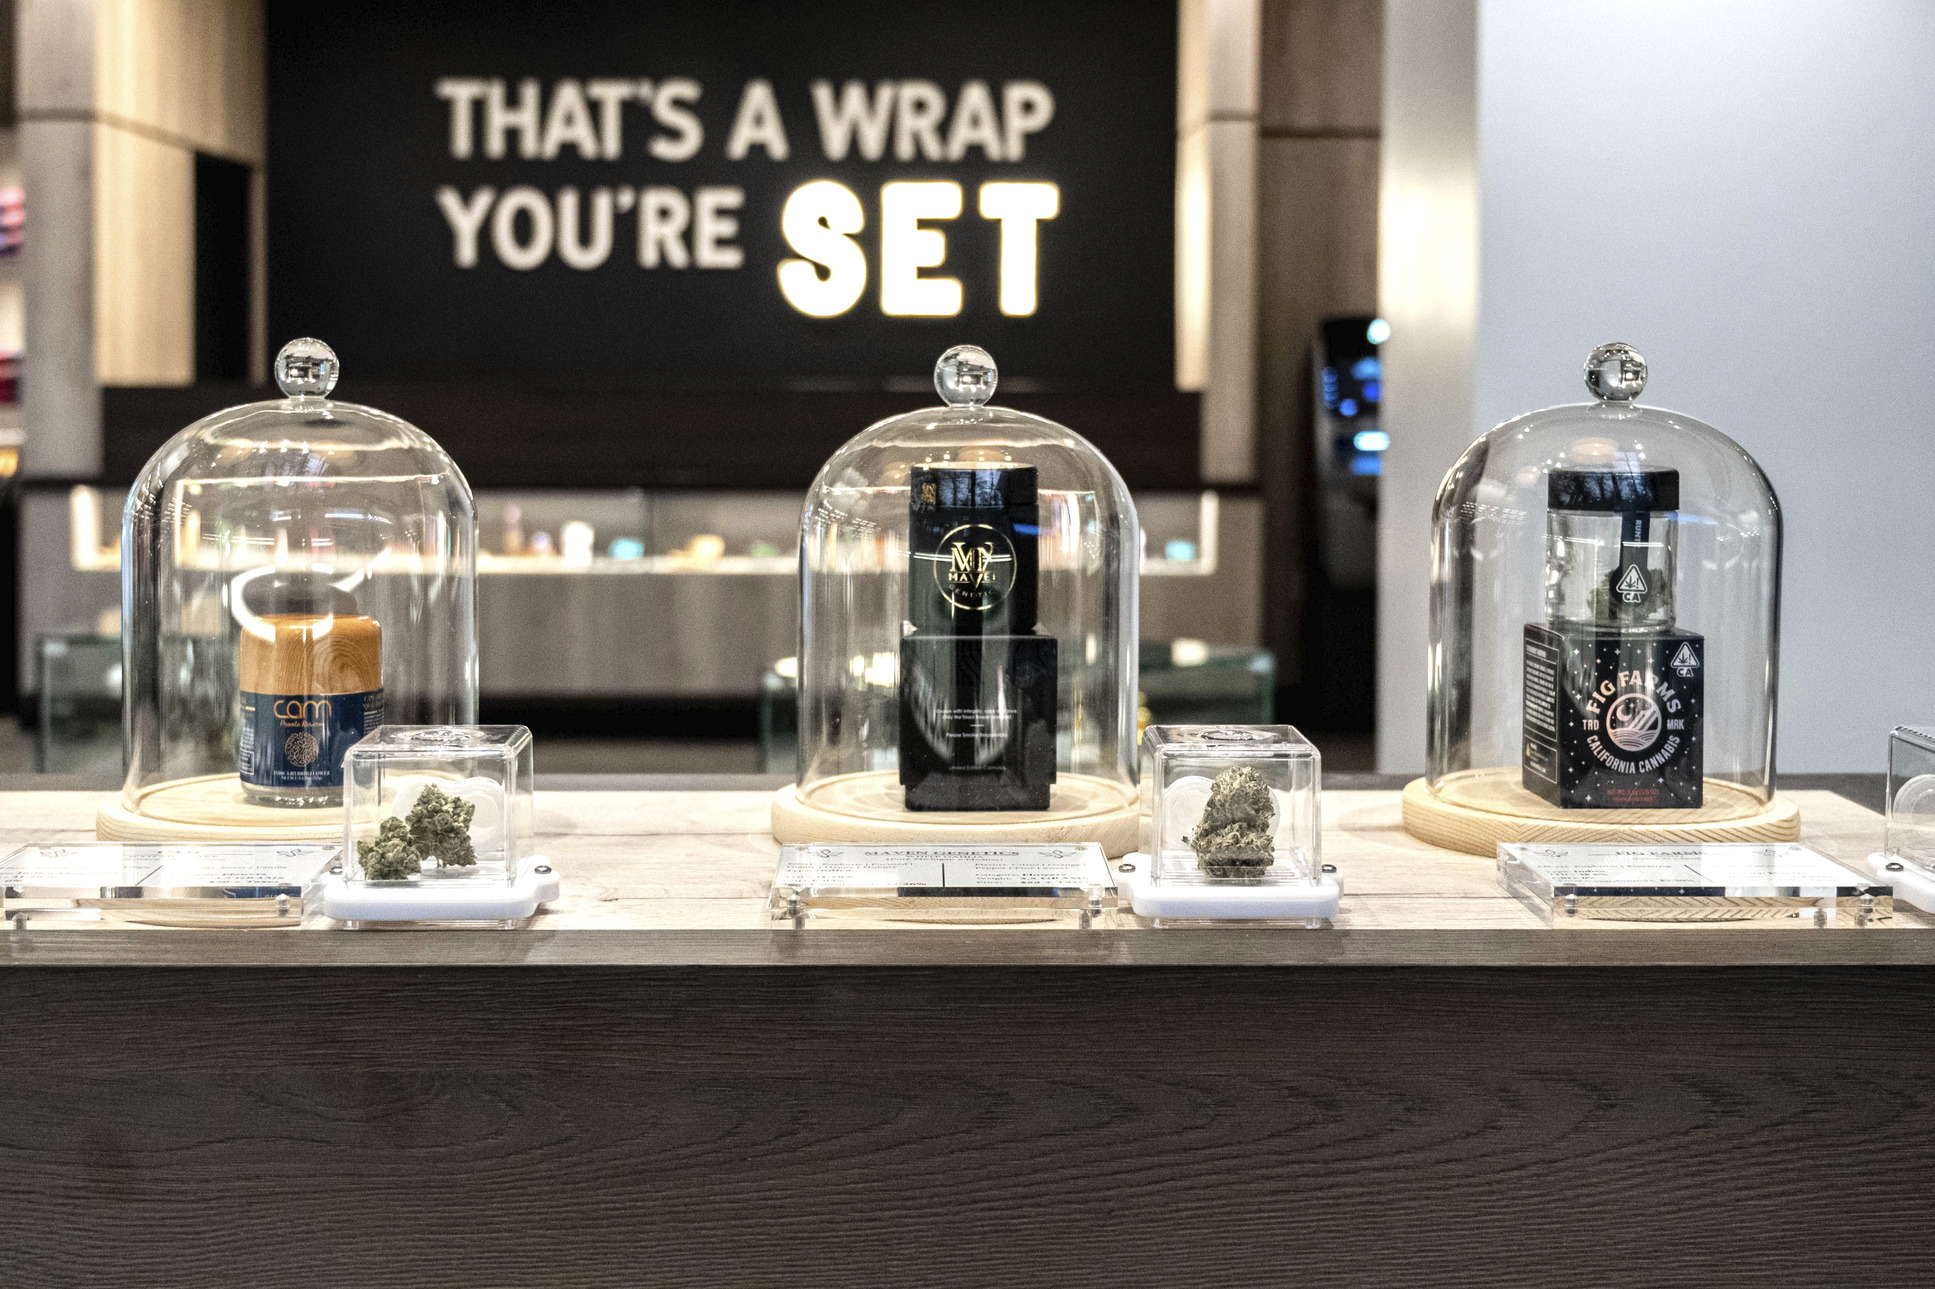 Managing The Hidden Costs of Cannabis Dispensary Build Outs Pt. 2